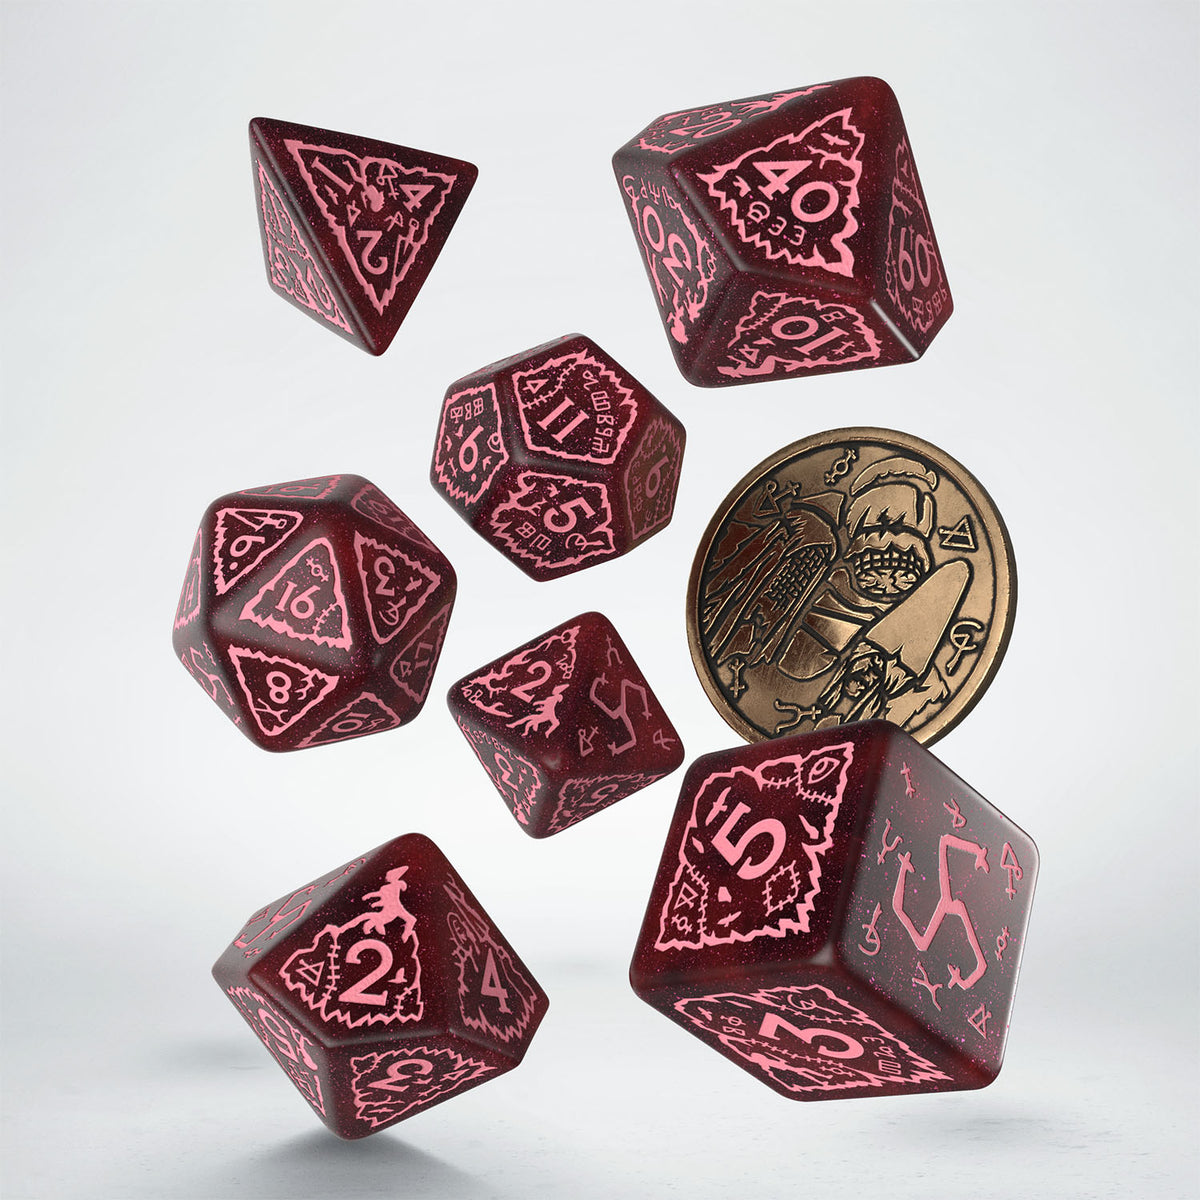 Q Workshop - The Witcher Dice Set Crones - Whispess Dice Set 7 With Coin